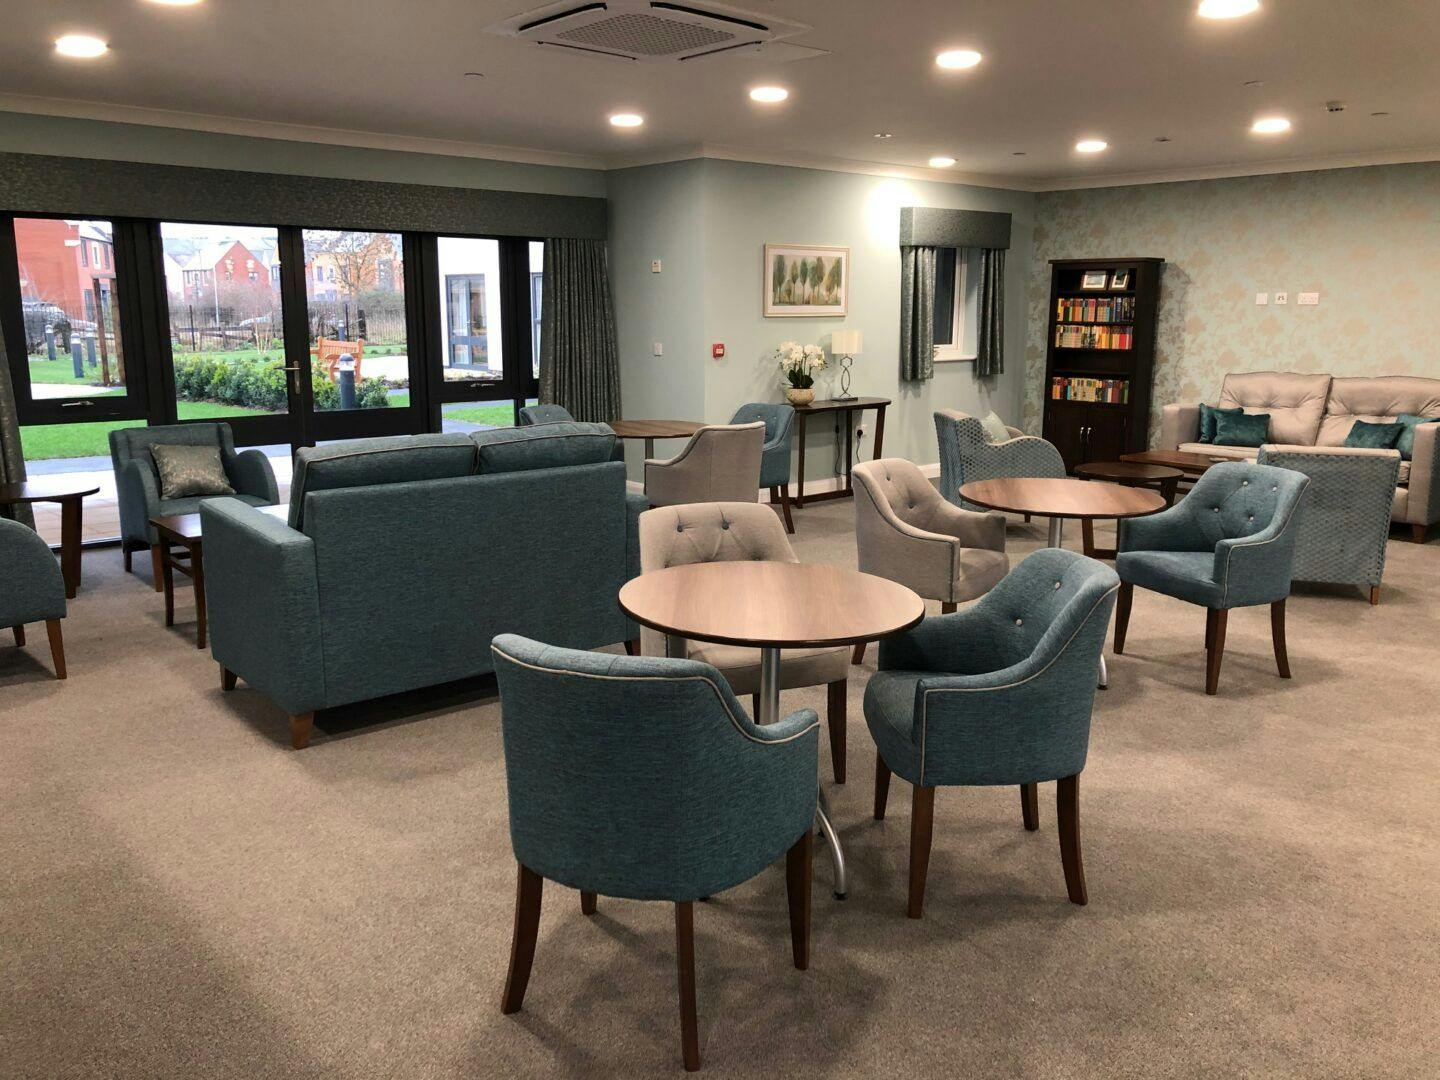 Communal Room at Bishop's Cleeve Care Home in Cheltenham, Gloucestershire